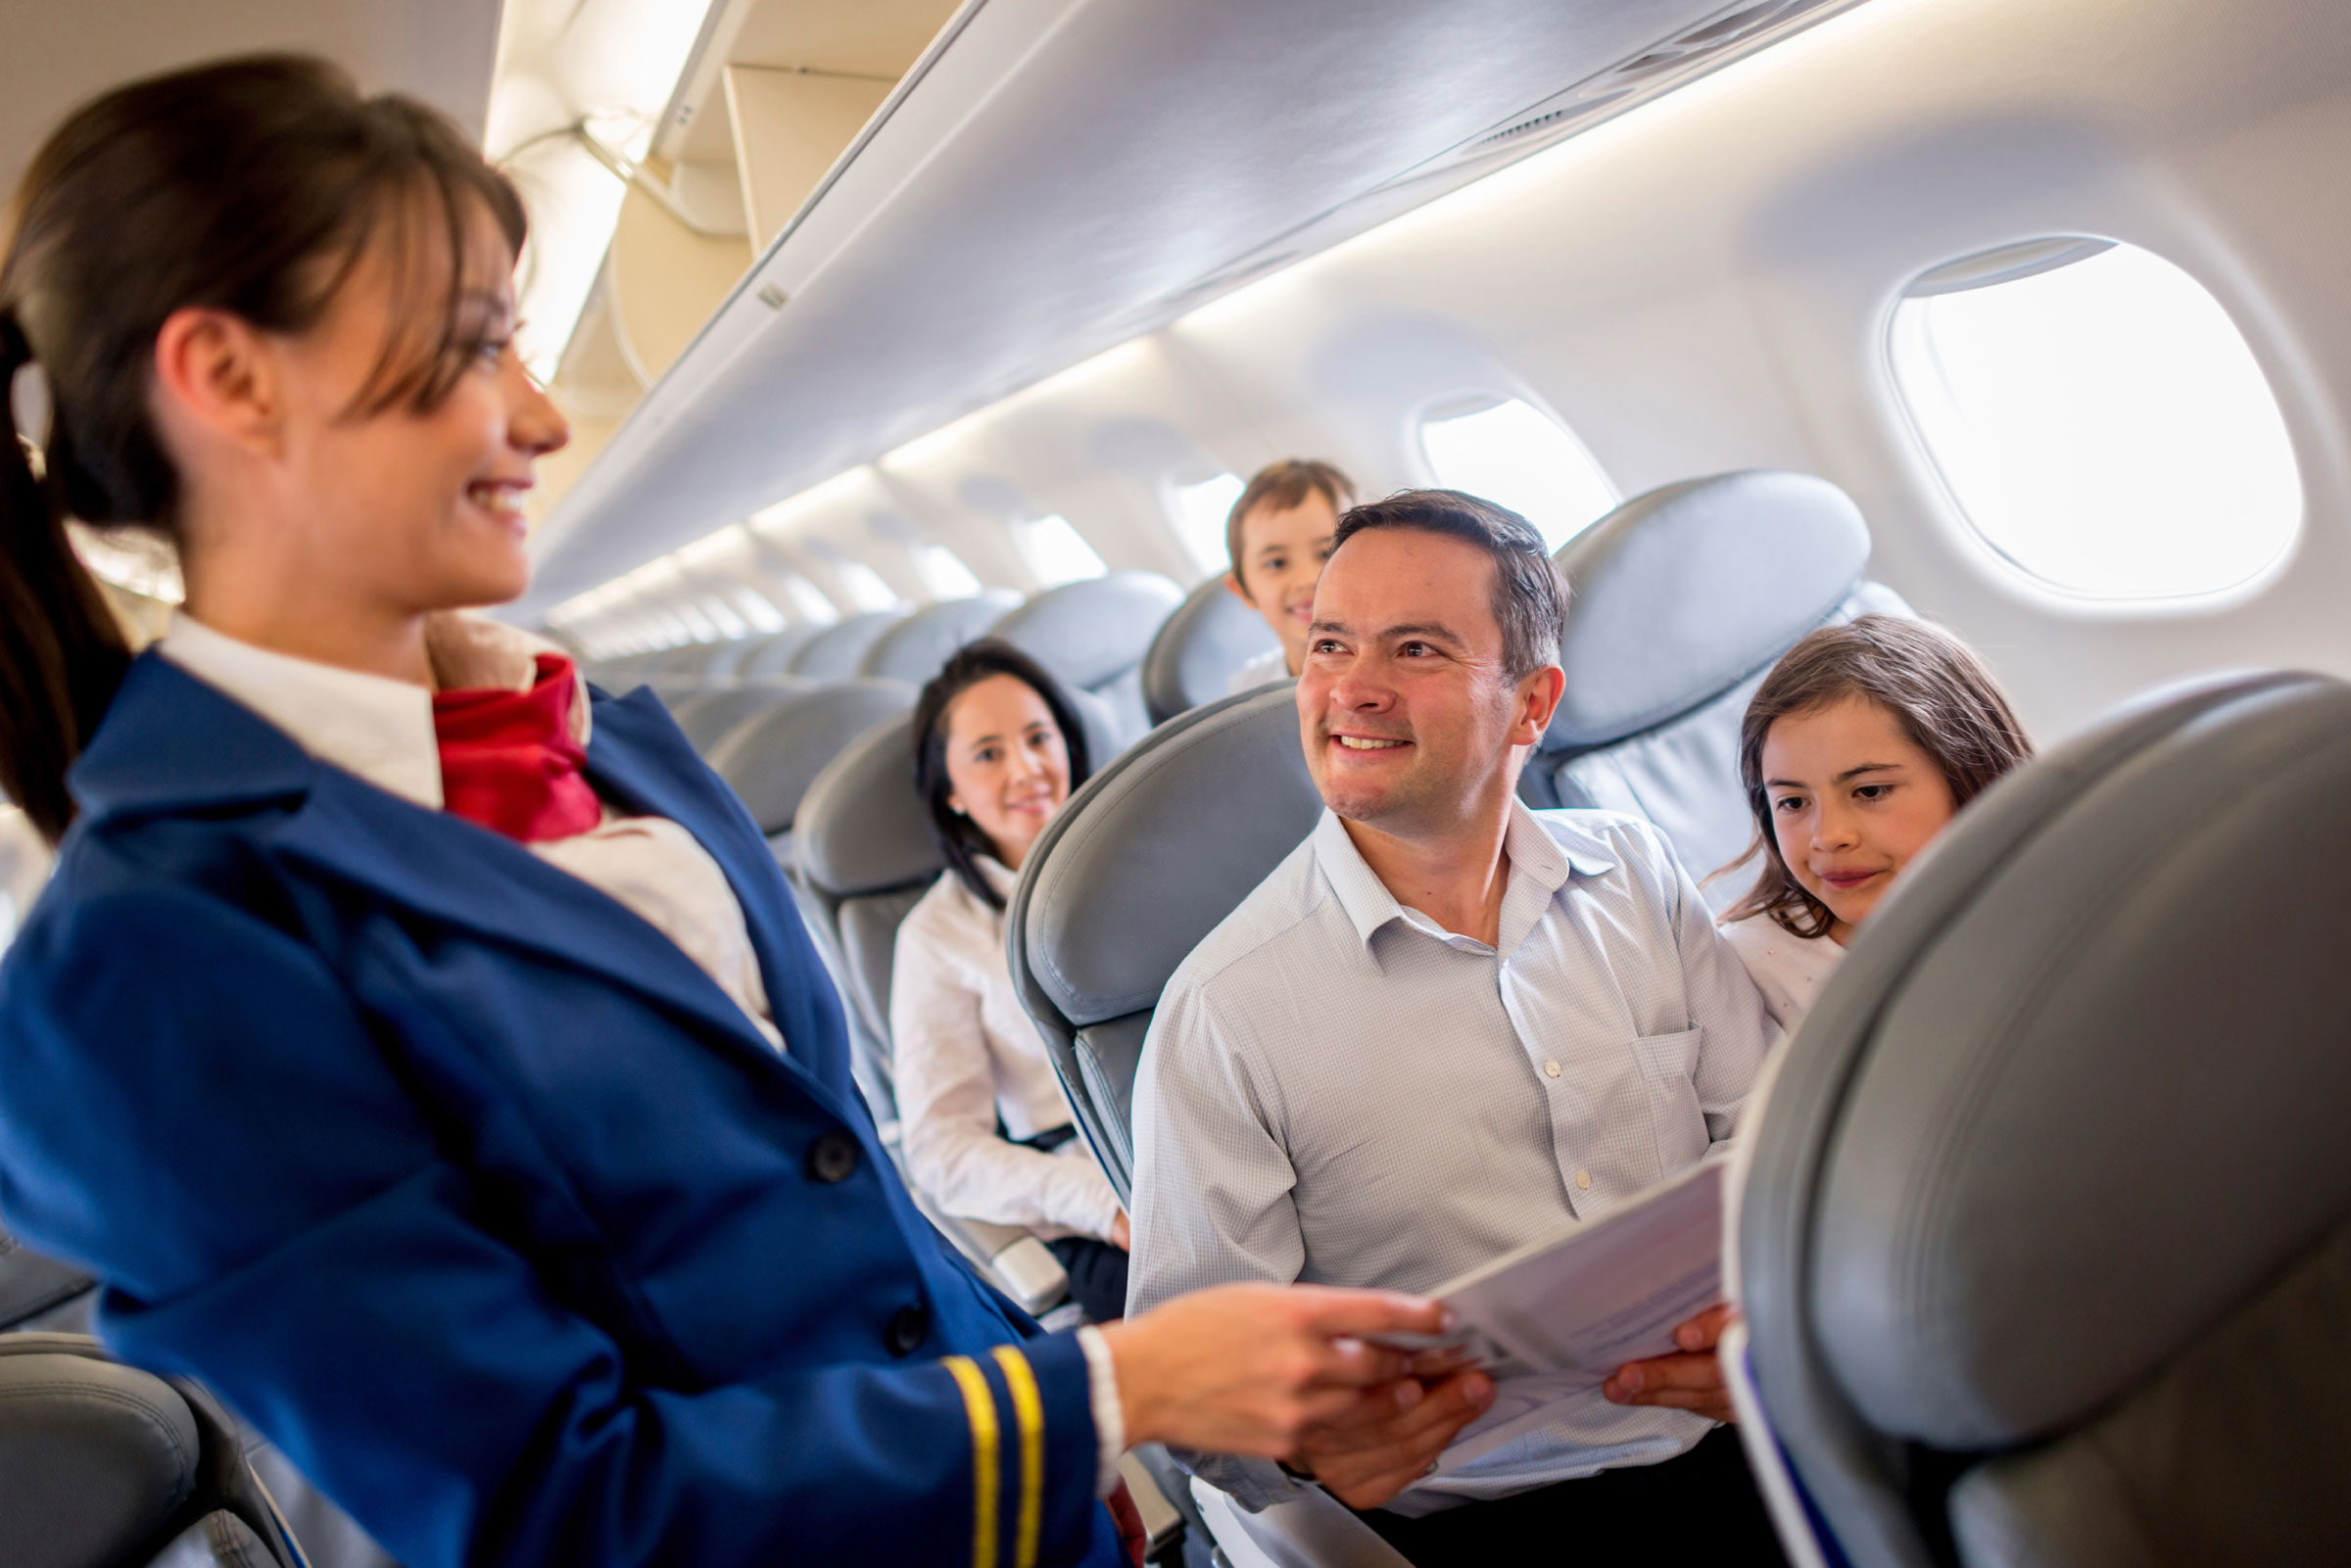 10-13-things-your-flight-attendant-wont-tell-you-tattling